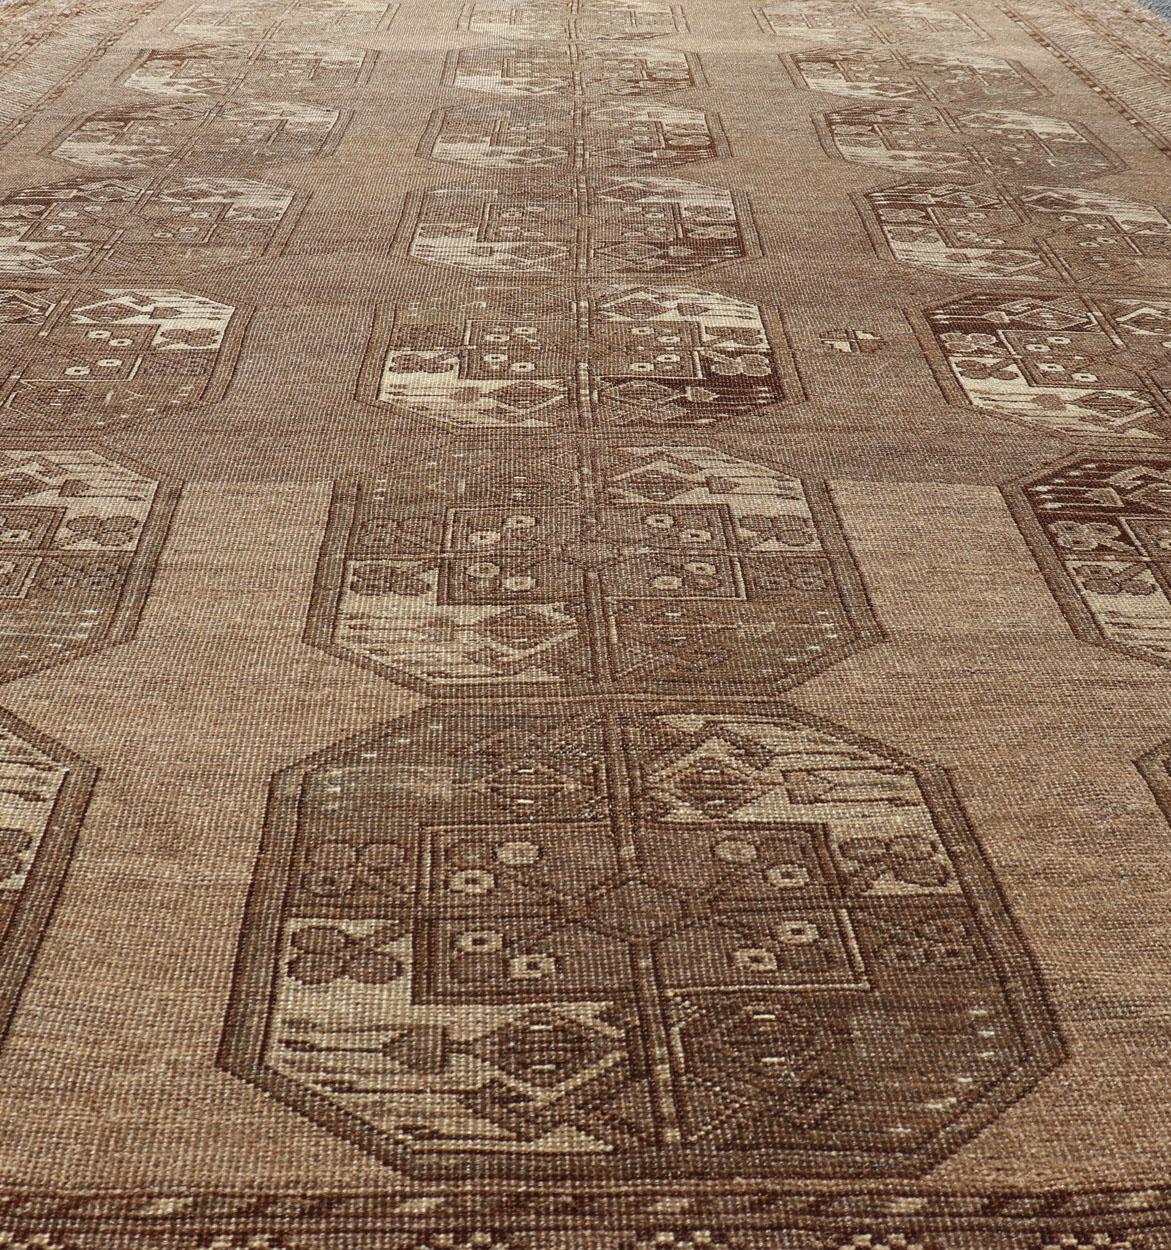 Hand-Knotted Turkomen Ersari Rug in Wool with Sub-Geometric Repeating Gul Design For Sale 3